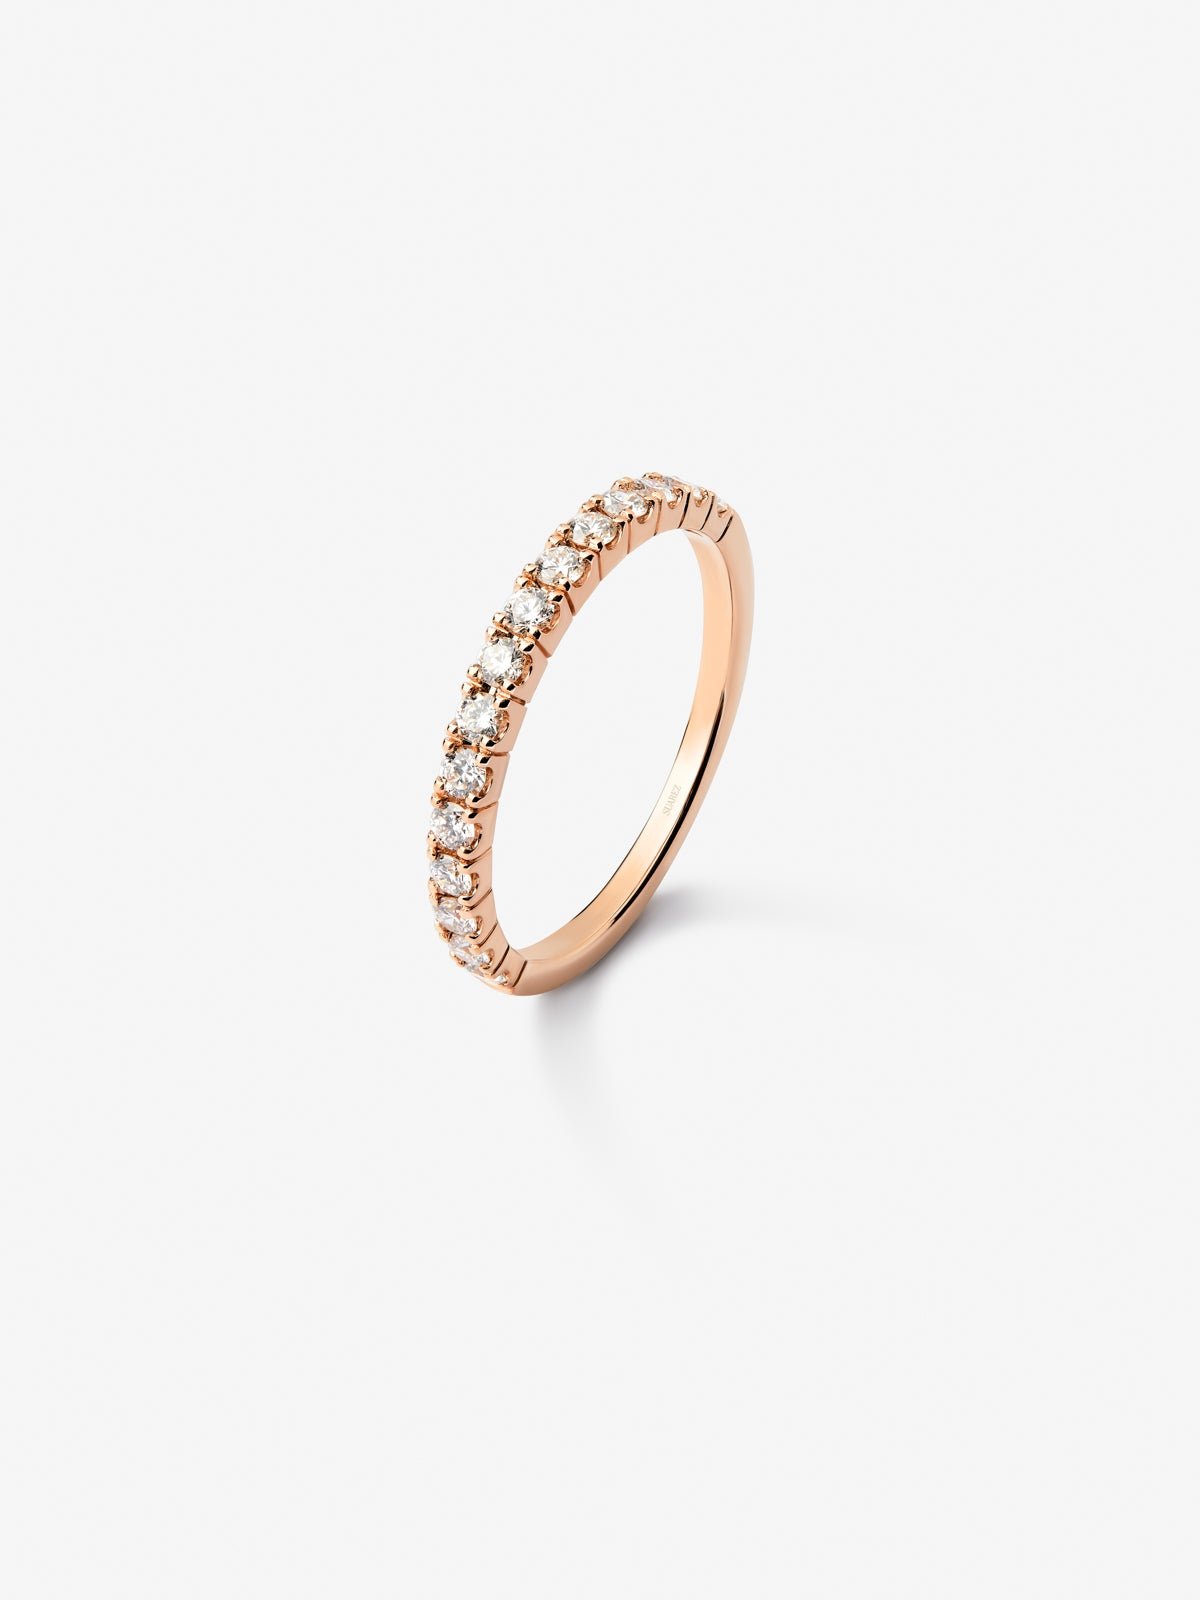 Half ring in 18K rose gold with 15 brilliant-cut diamonds with a total of 0.3 cts